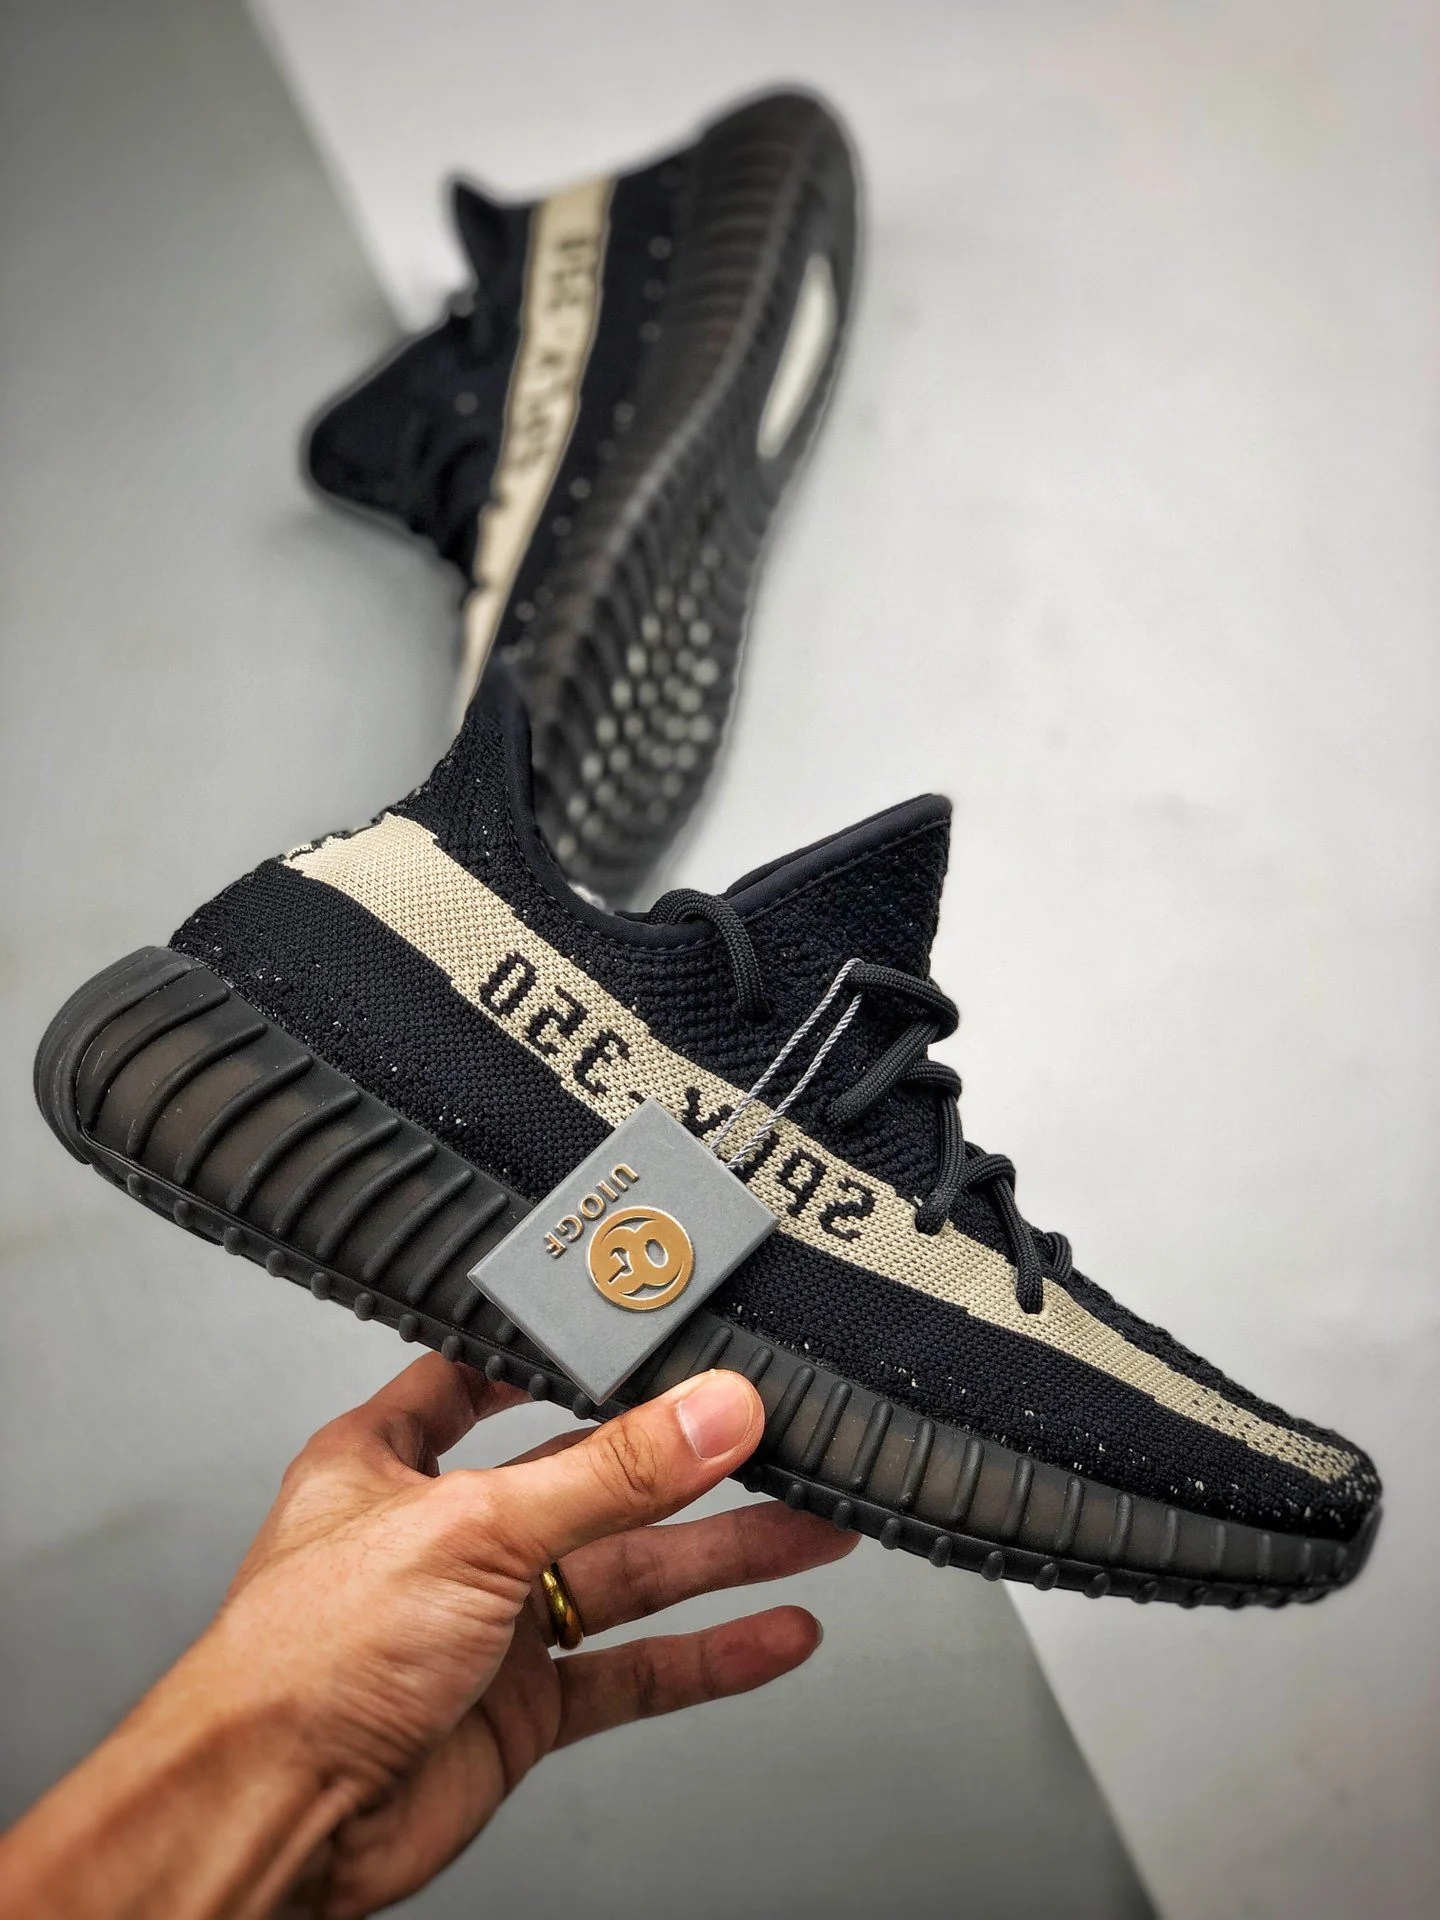 Adidas Yeezy Boost 350 V2 Black White BY1604 For Sale